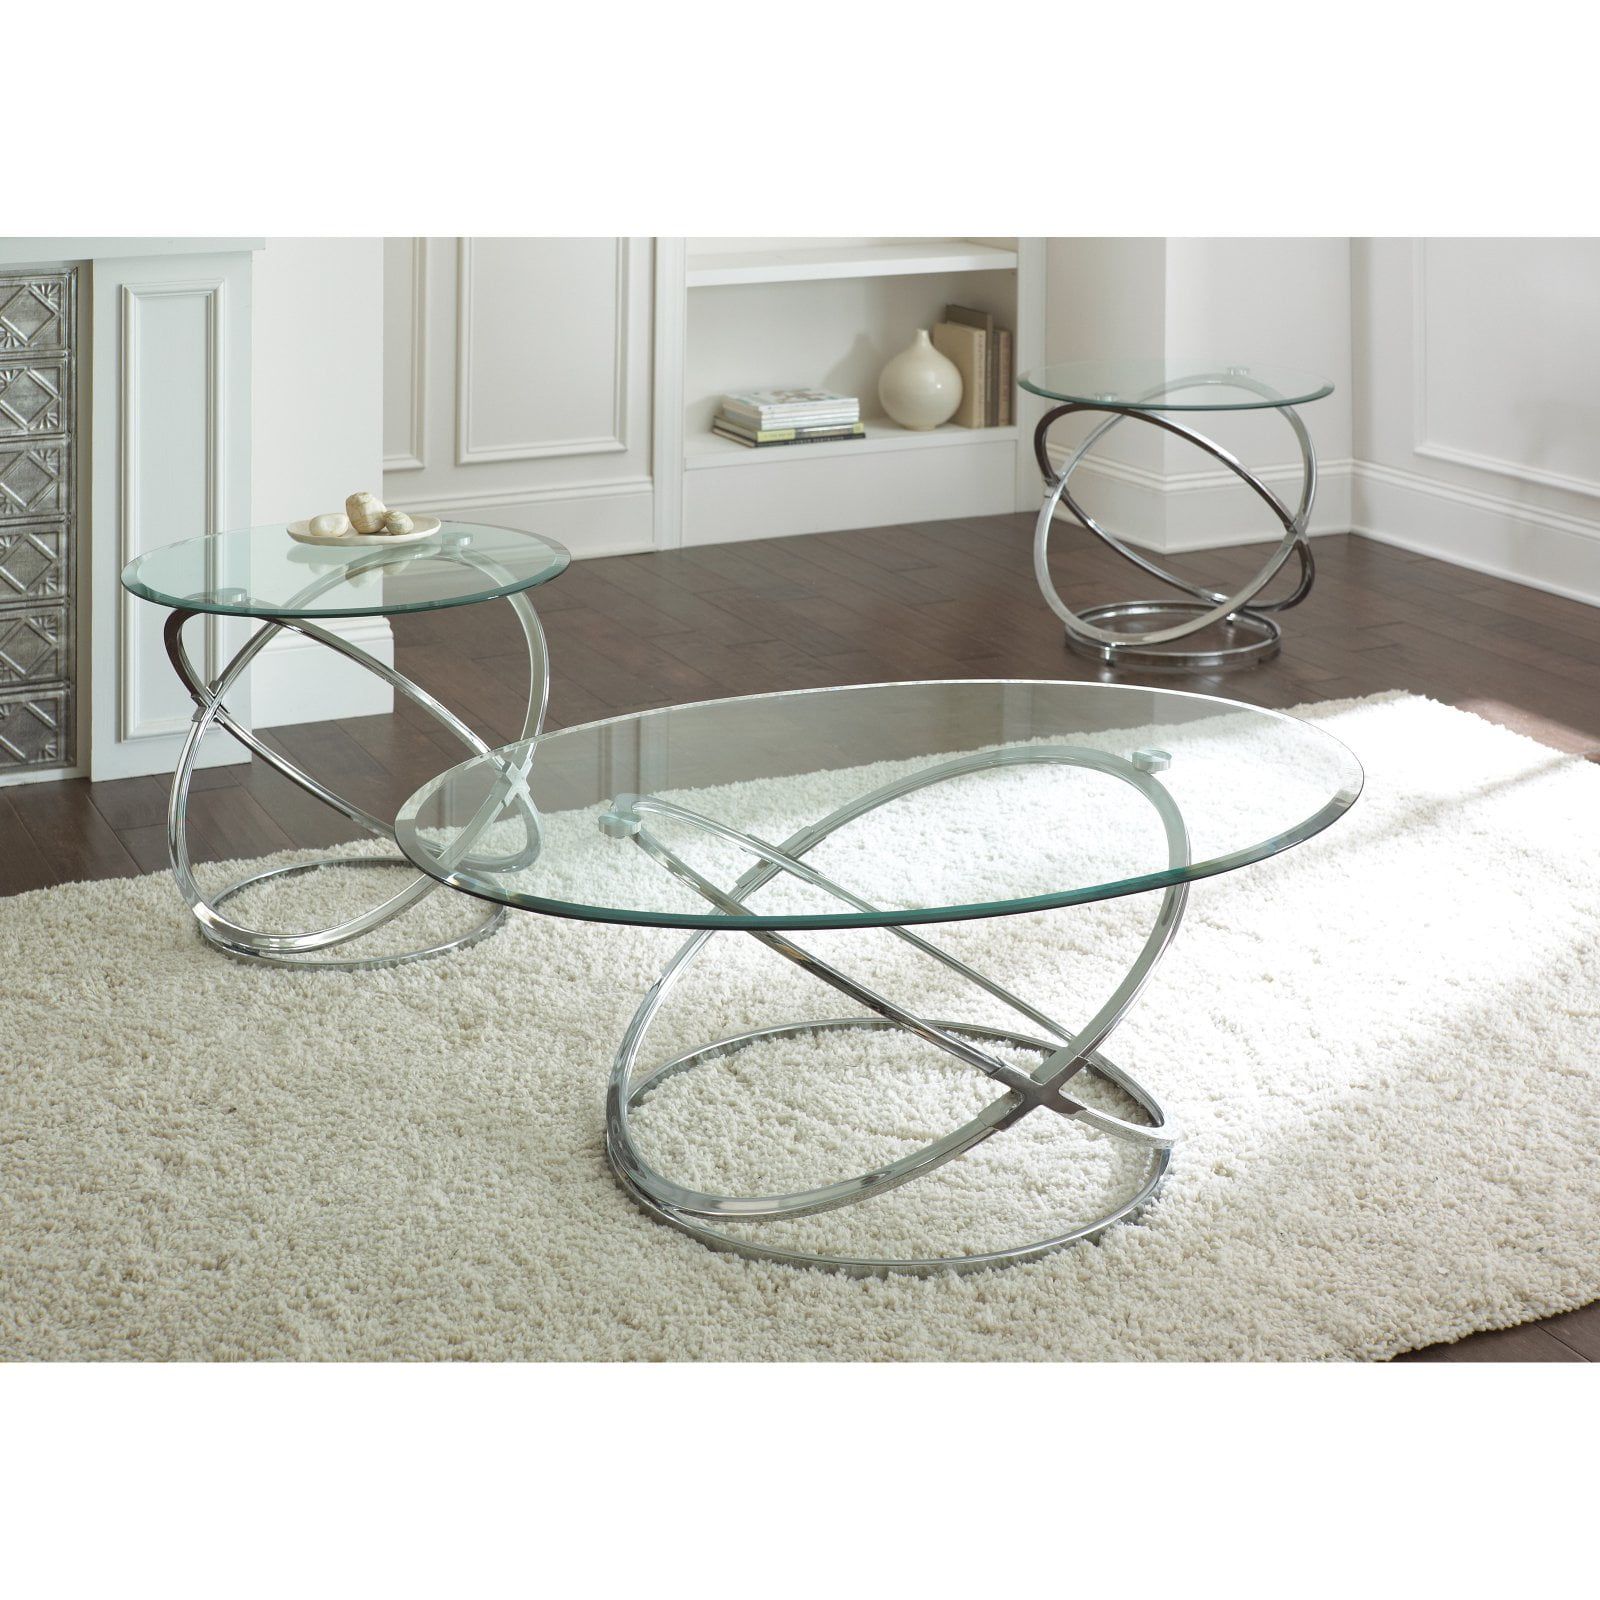 Steve Silver Orion Oval Chrome And Glass Coffee Table Set – Walmart Inside Oval Glass Coffee Tables (View 15 of 20)